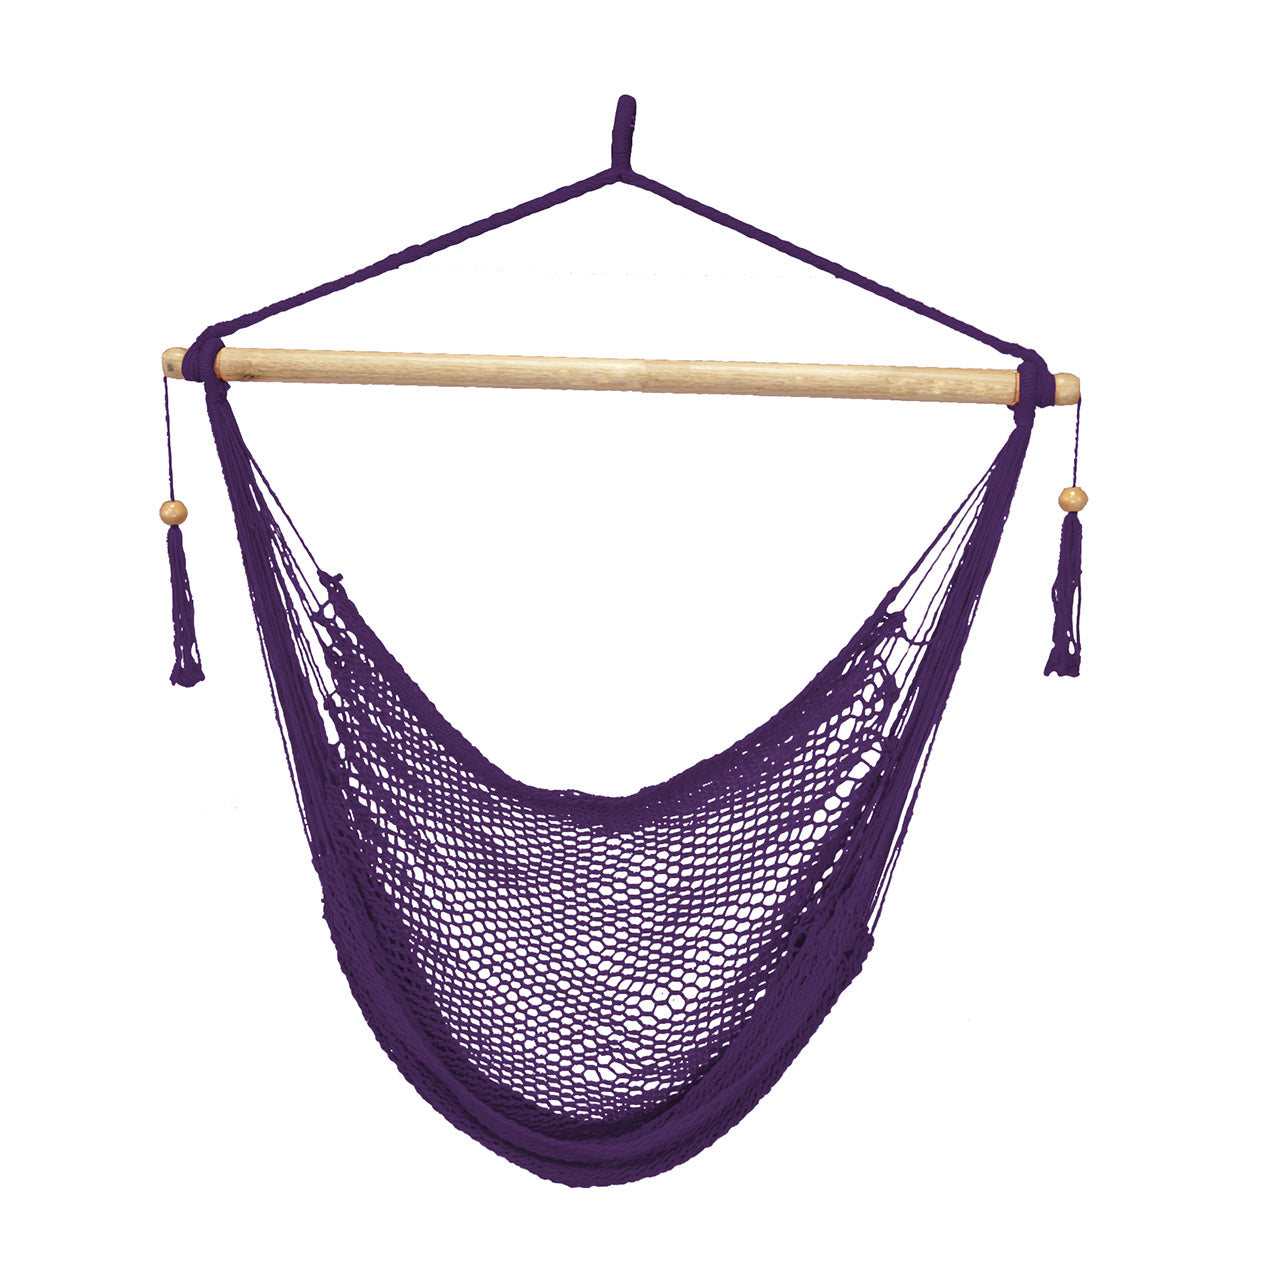 Bliss Hammocks 40-inch Island Rope Hammock Chair with Hanging Hardware and Spreader Bar in the purple variation.